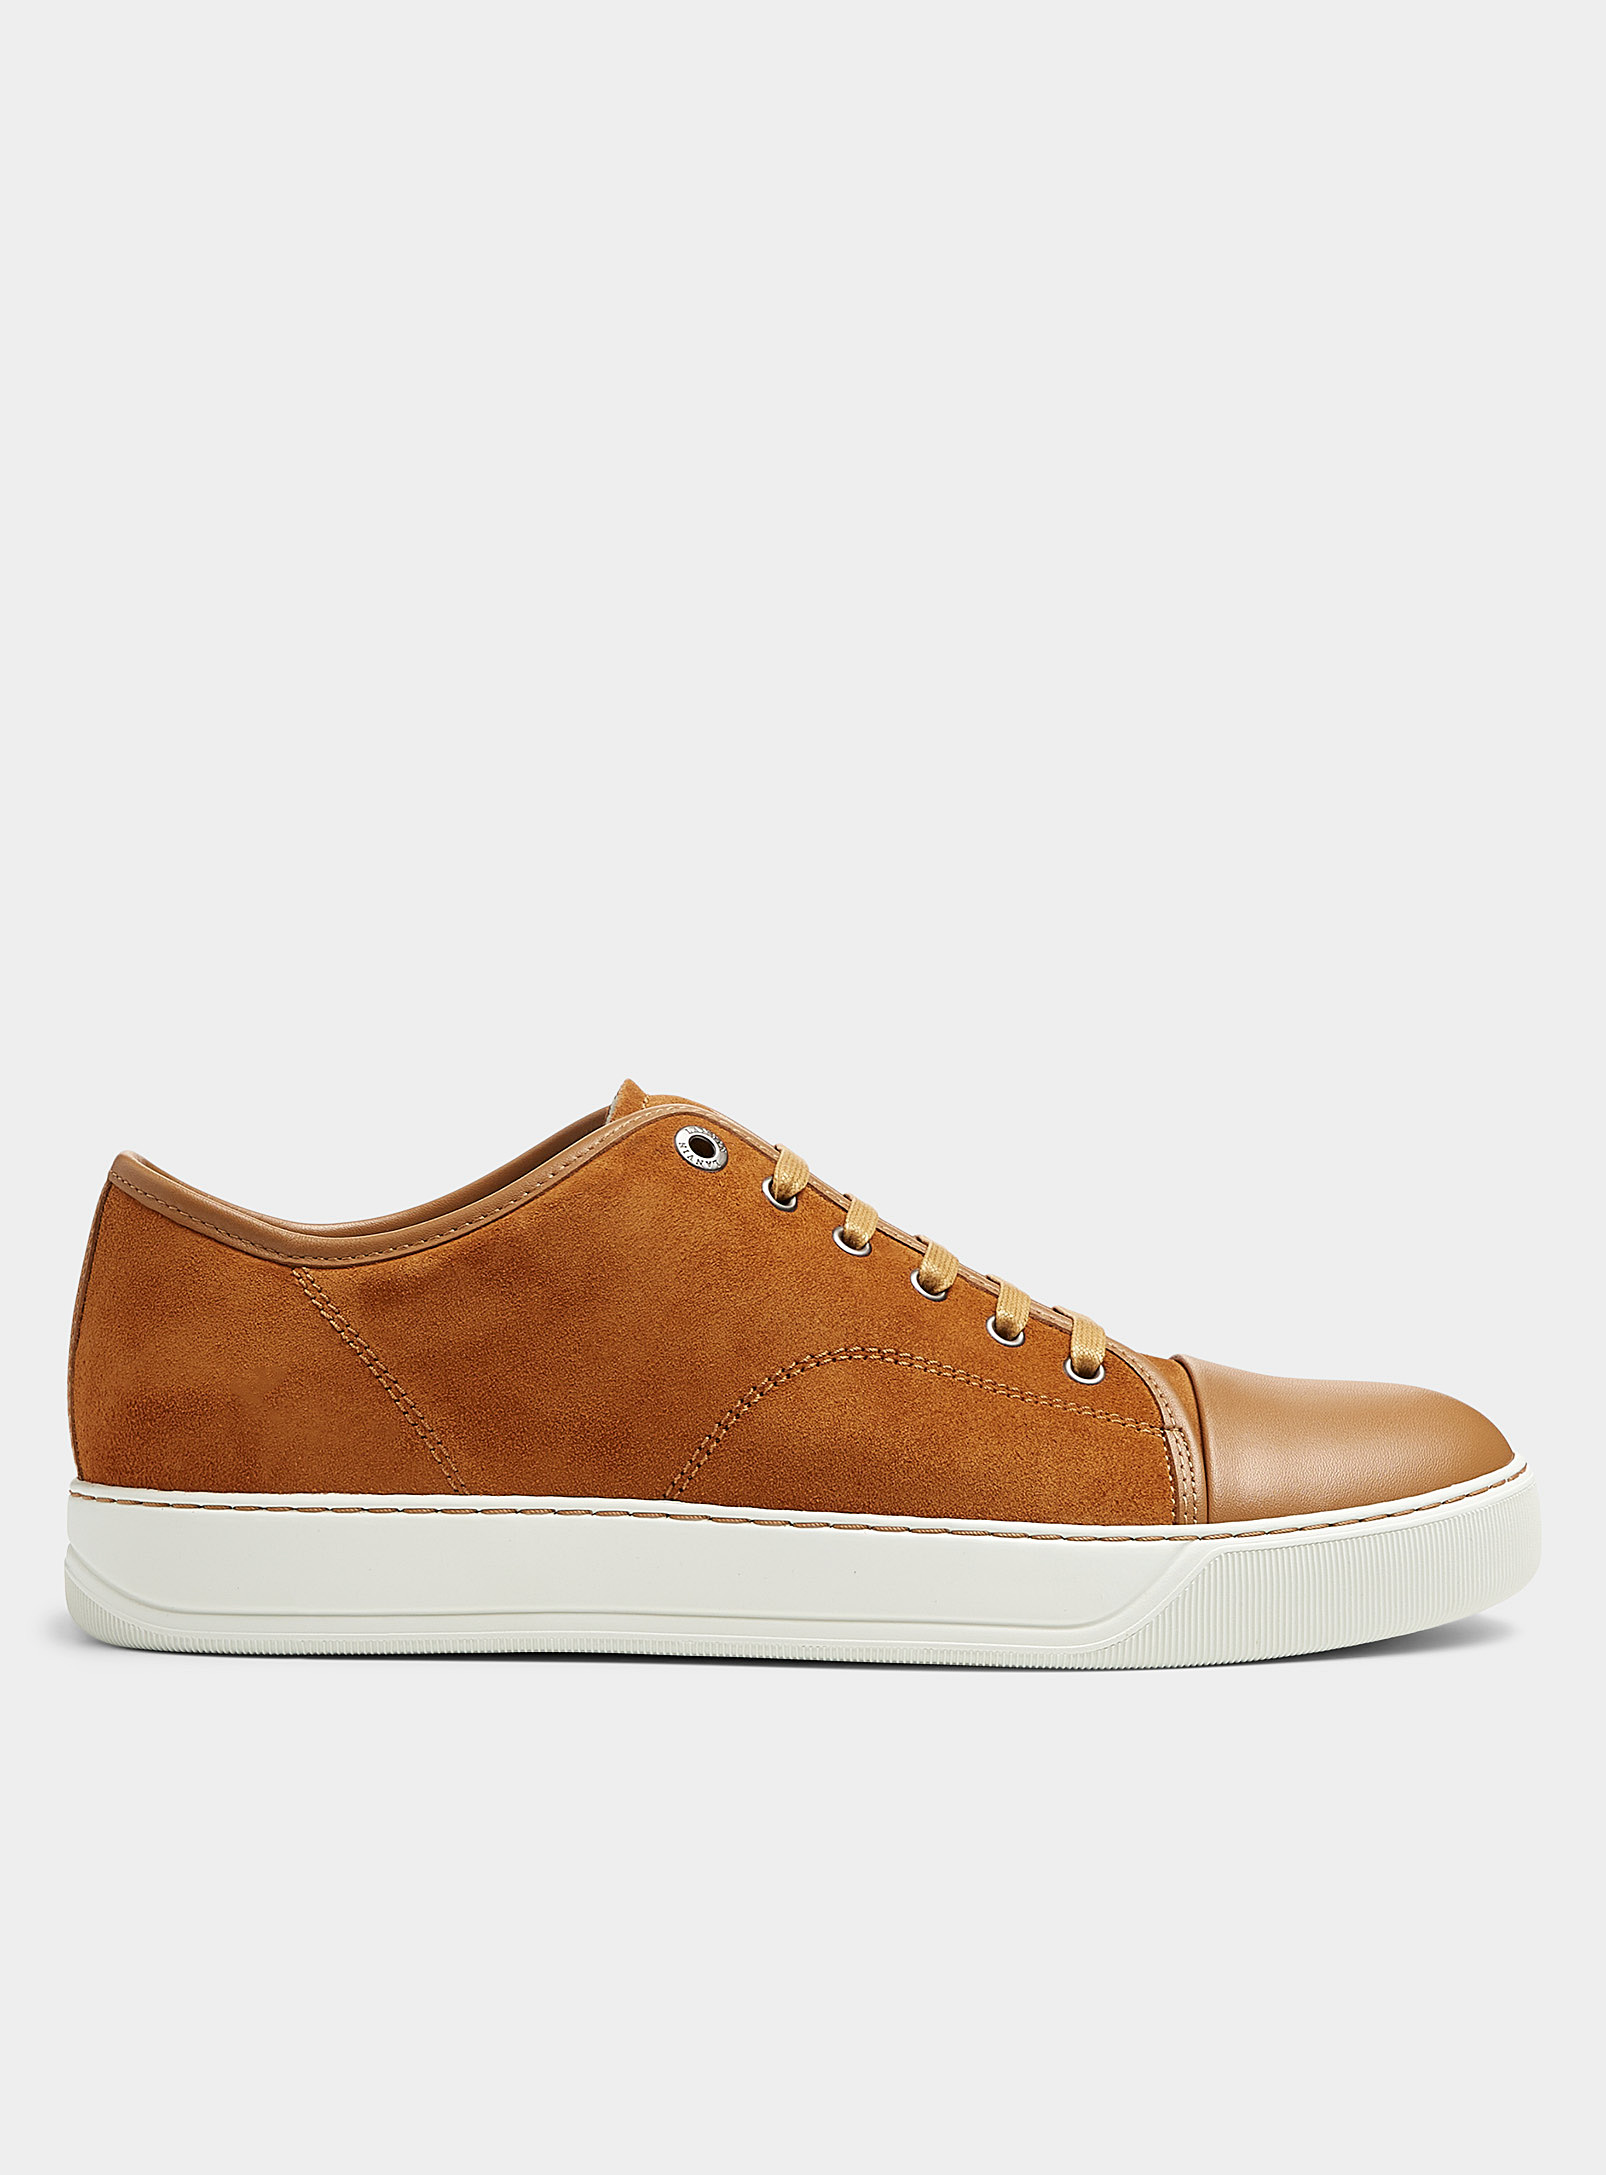 Lanvin - Men's Brown DBB1 suede and leather sneakers Men